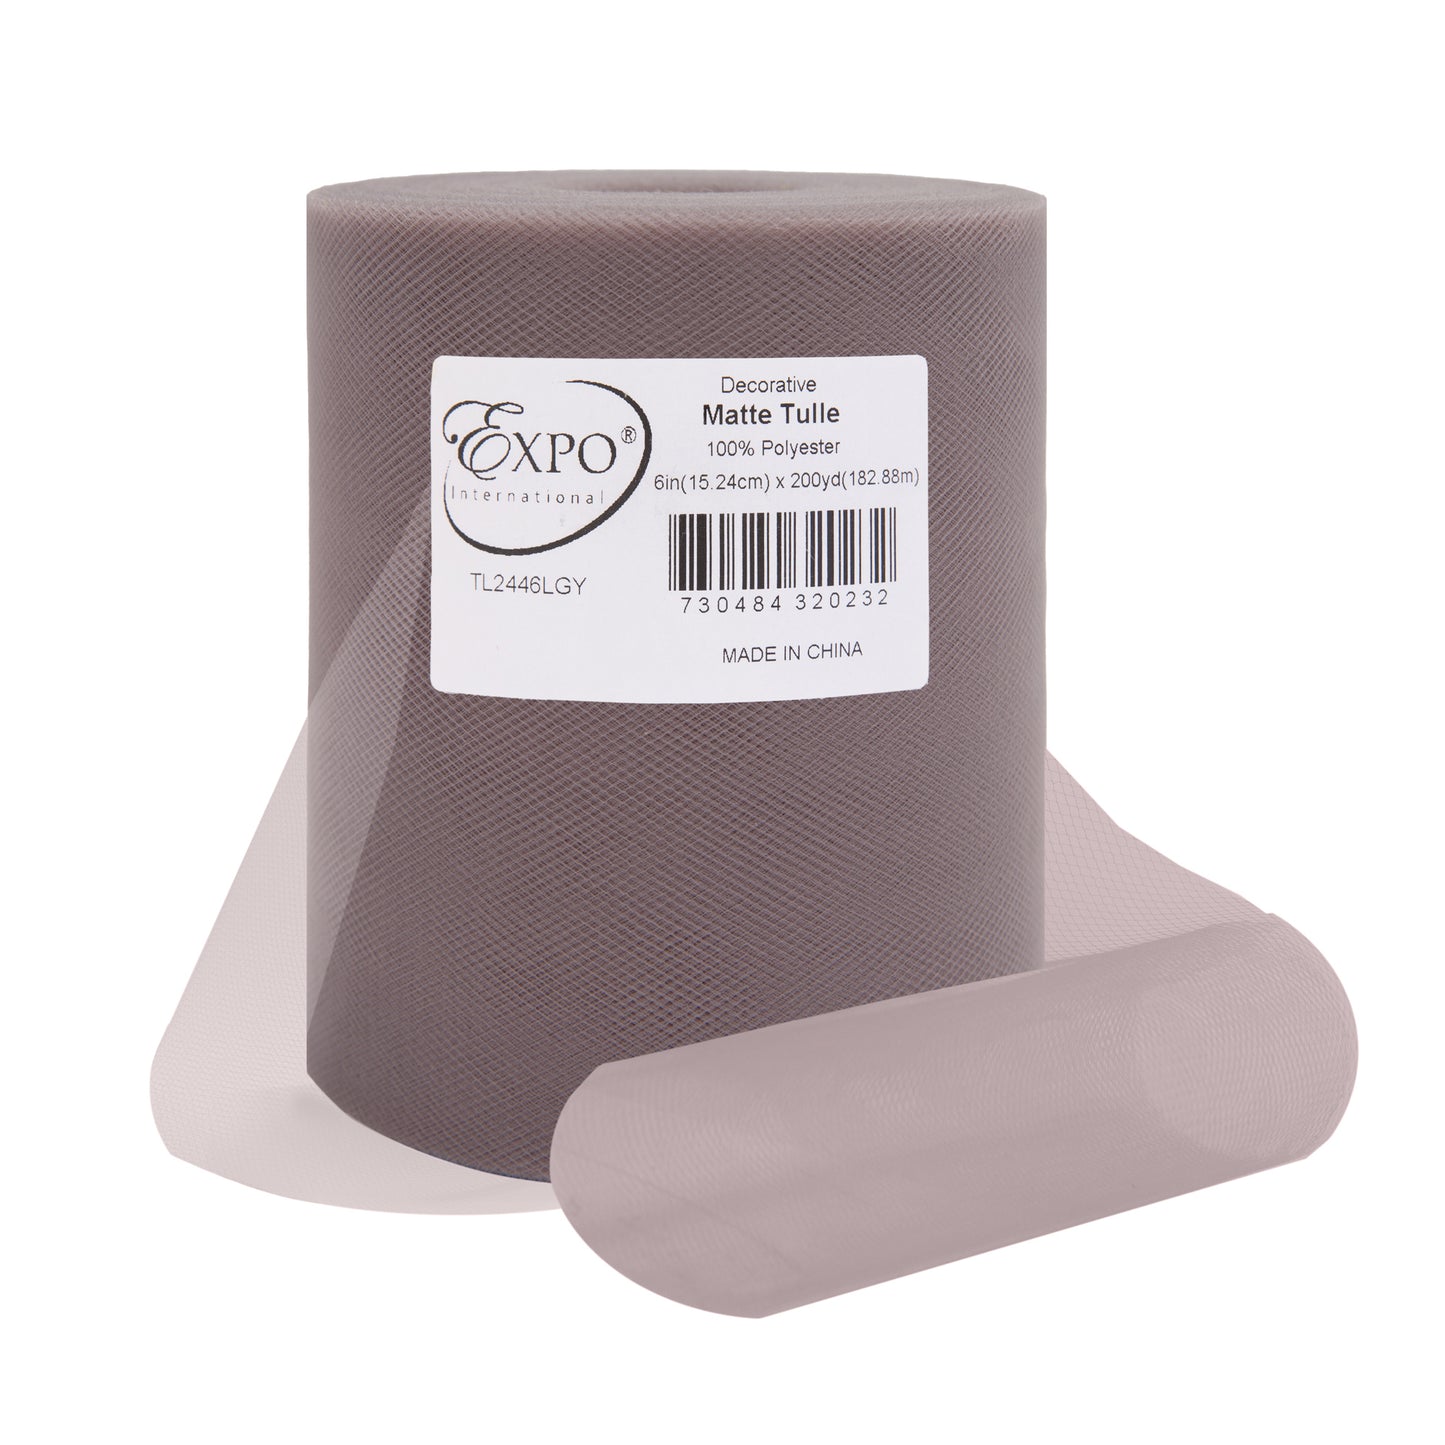 Decorative Matte Tulle, Roll/Spool of 6” X 200 Yards